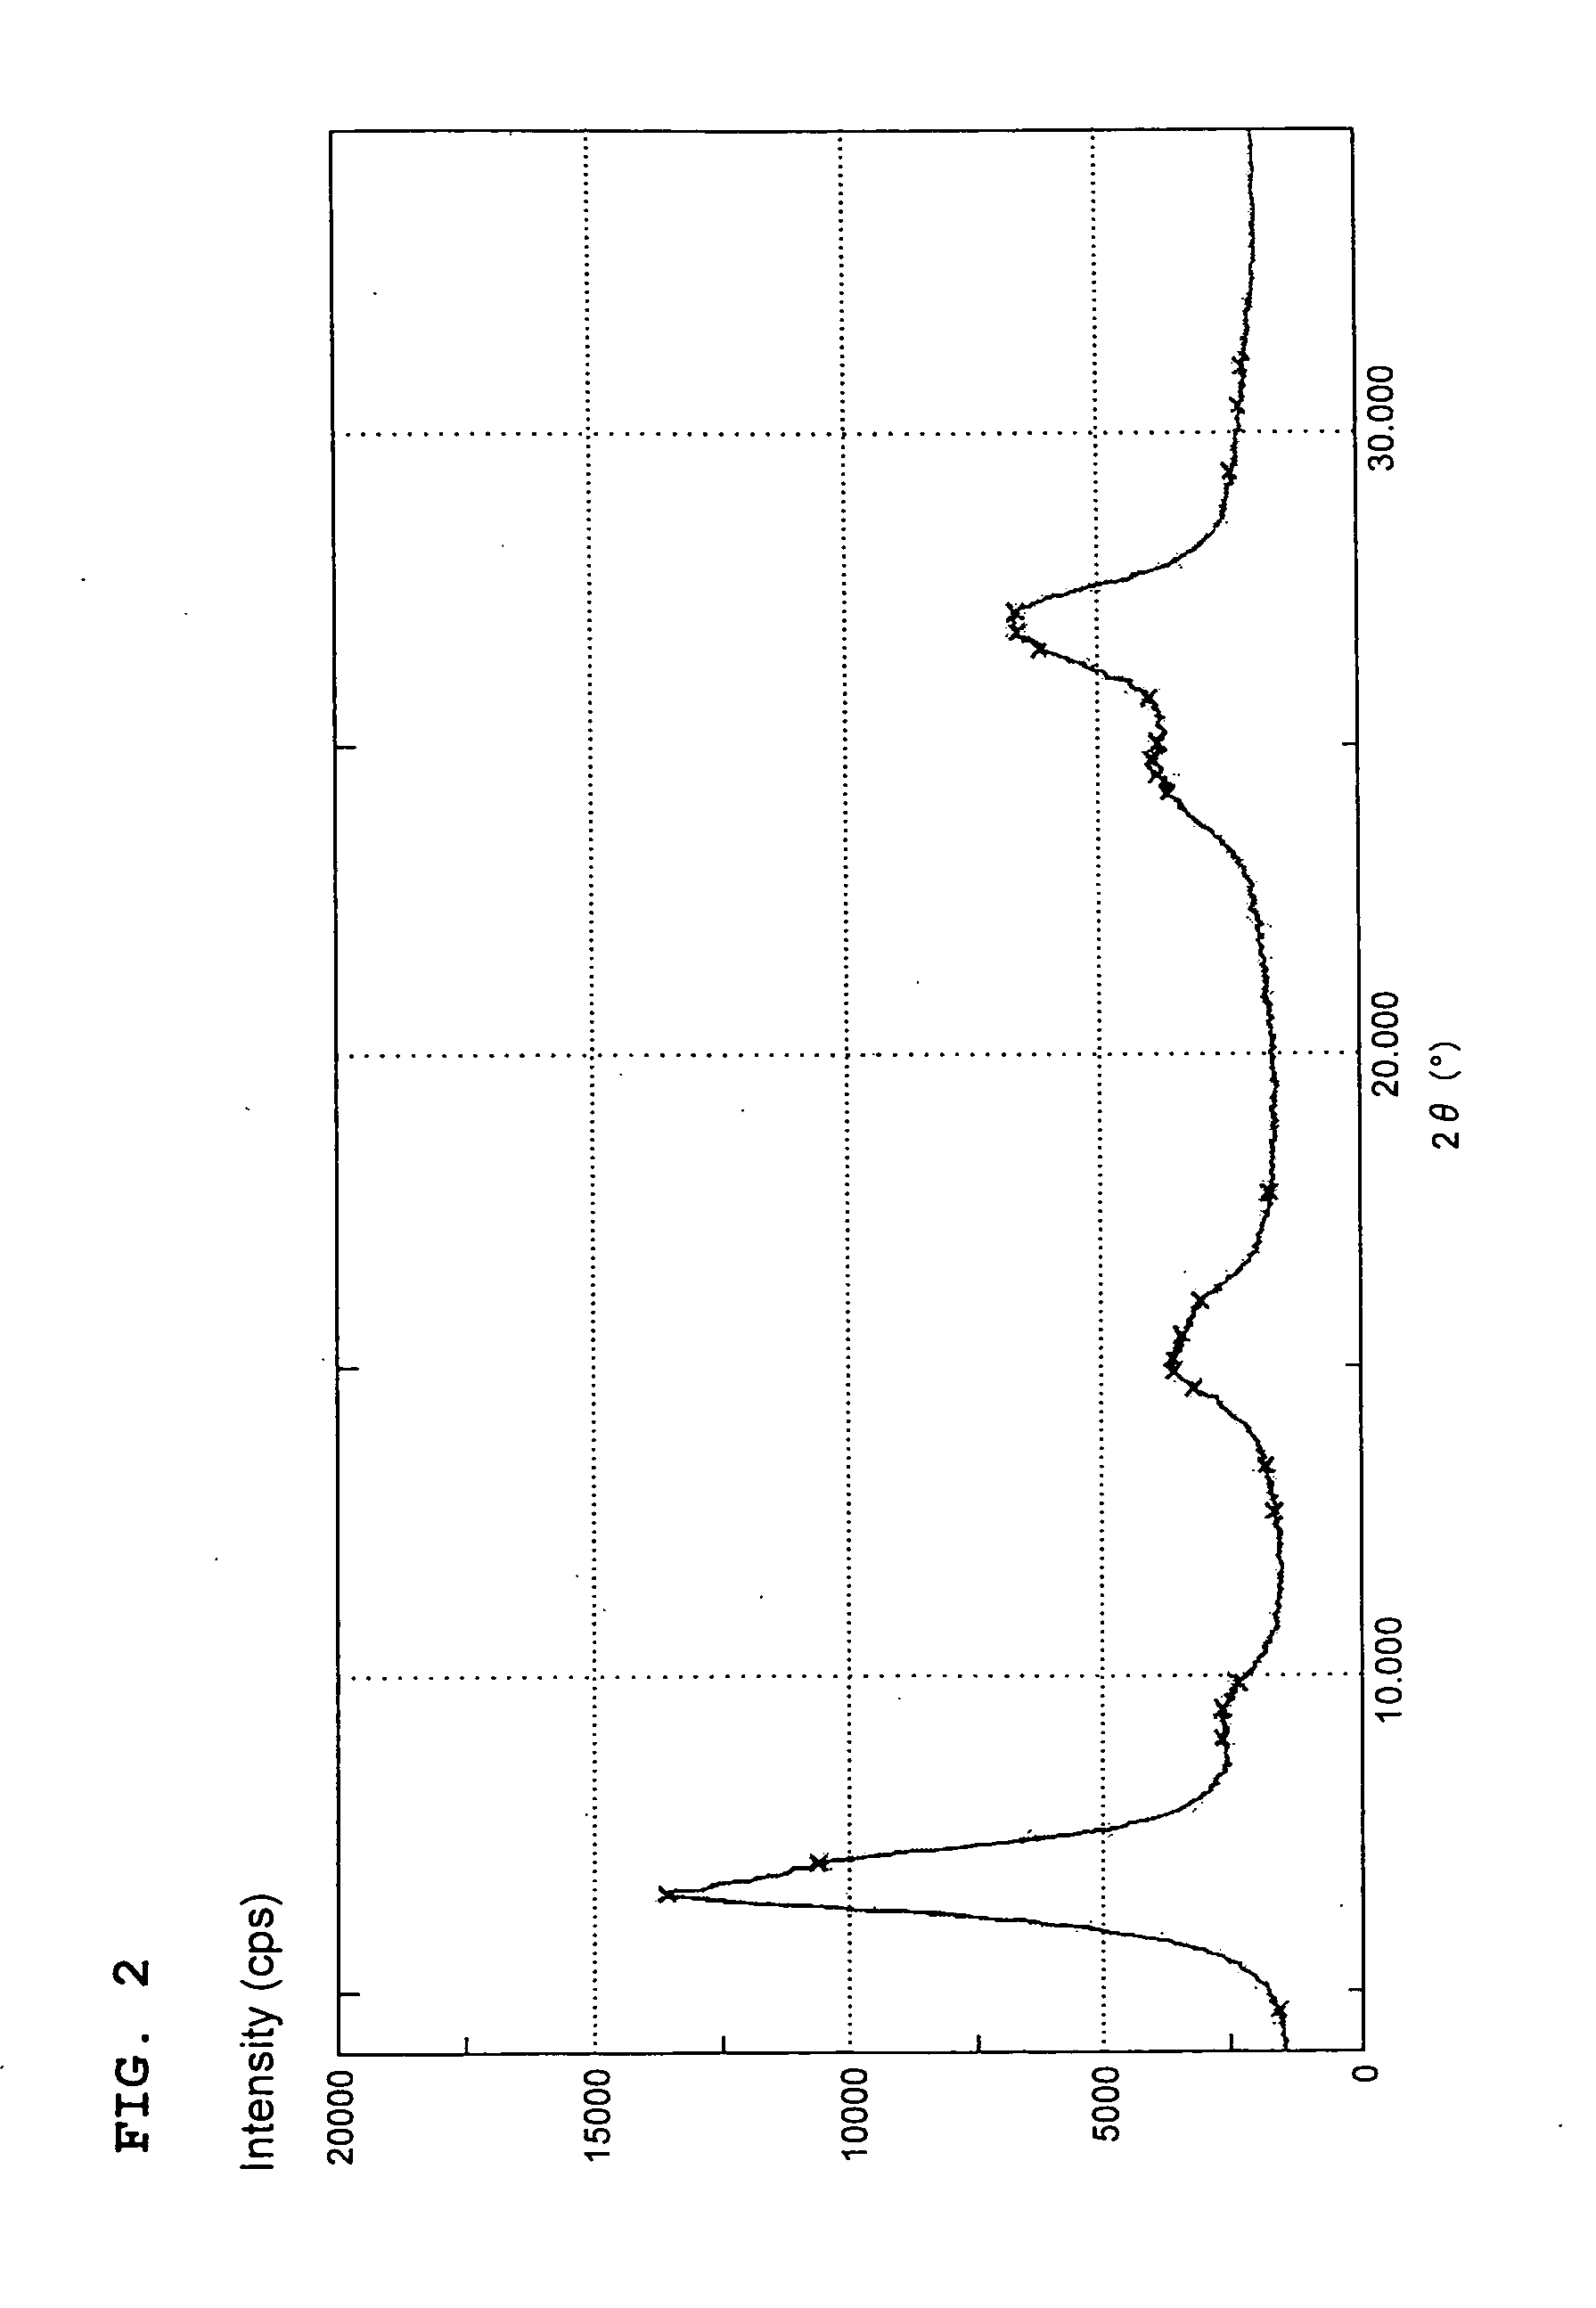 Coloring composition, method for production thereof, and coloring method